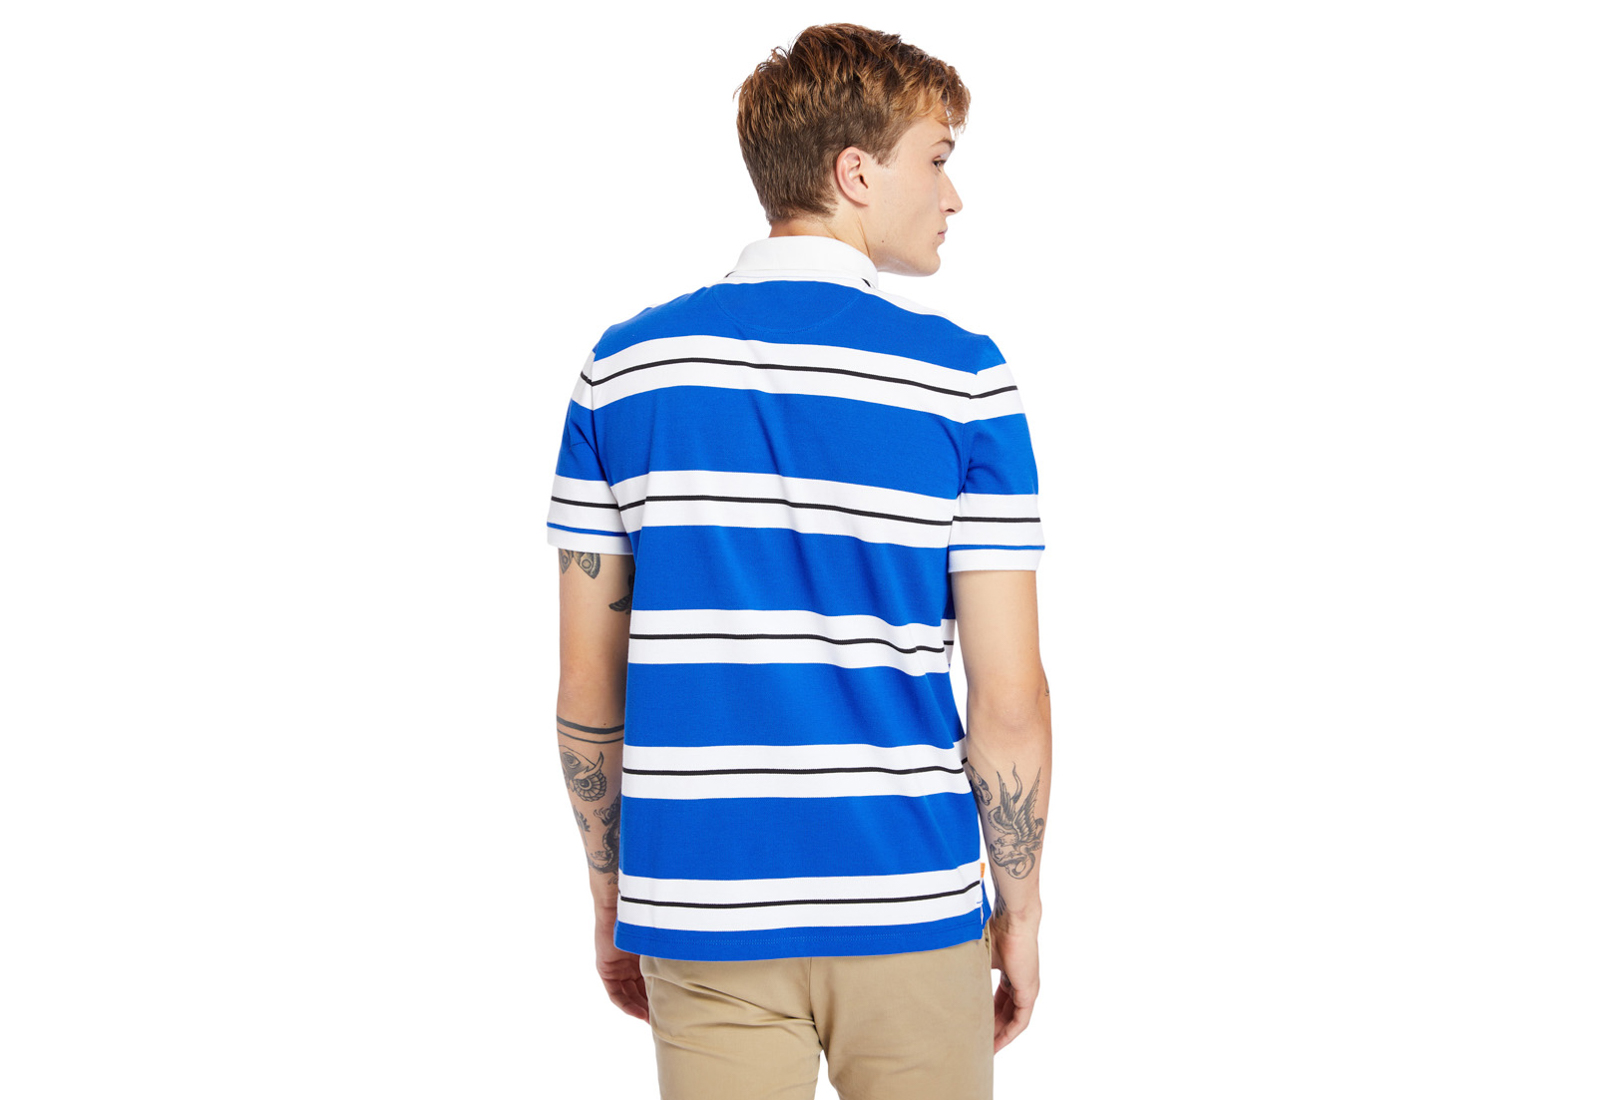 Timberland Haine Ss Stripe Pique Polo